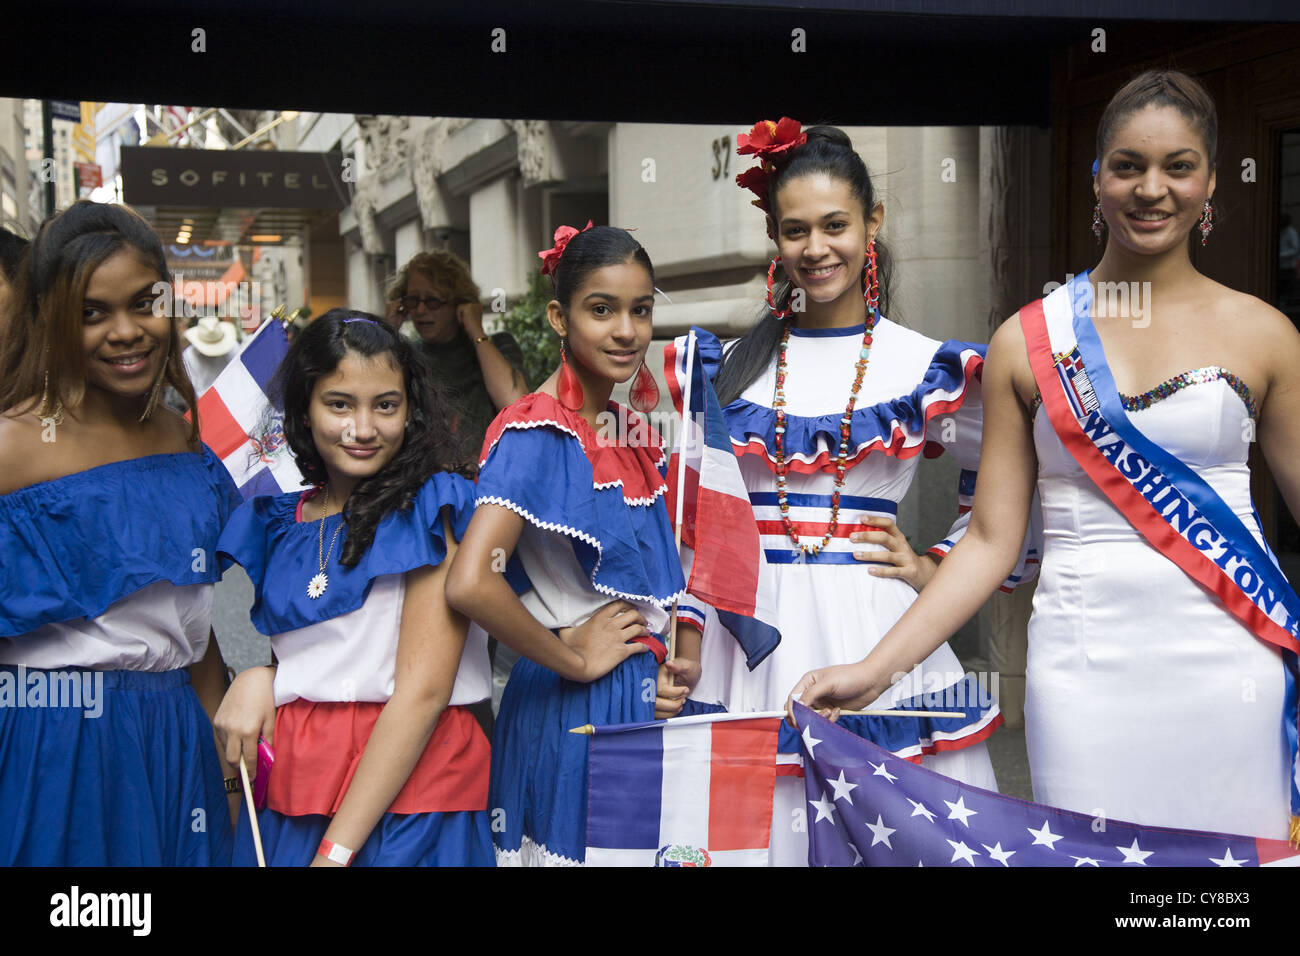 Hispanic Day Parade, New York City. Young women represent the Dominican